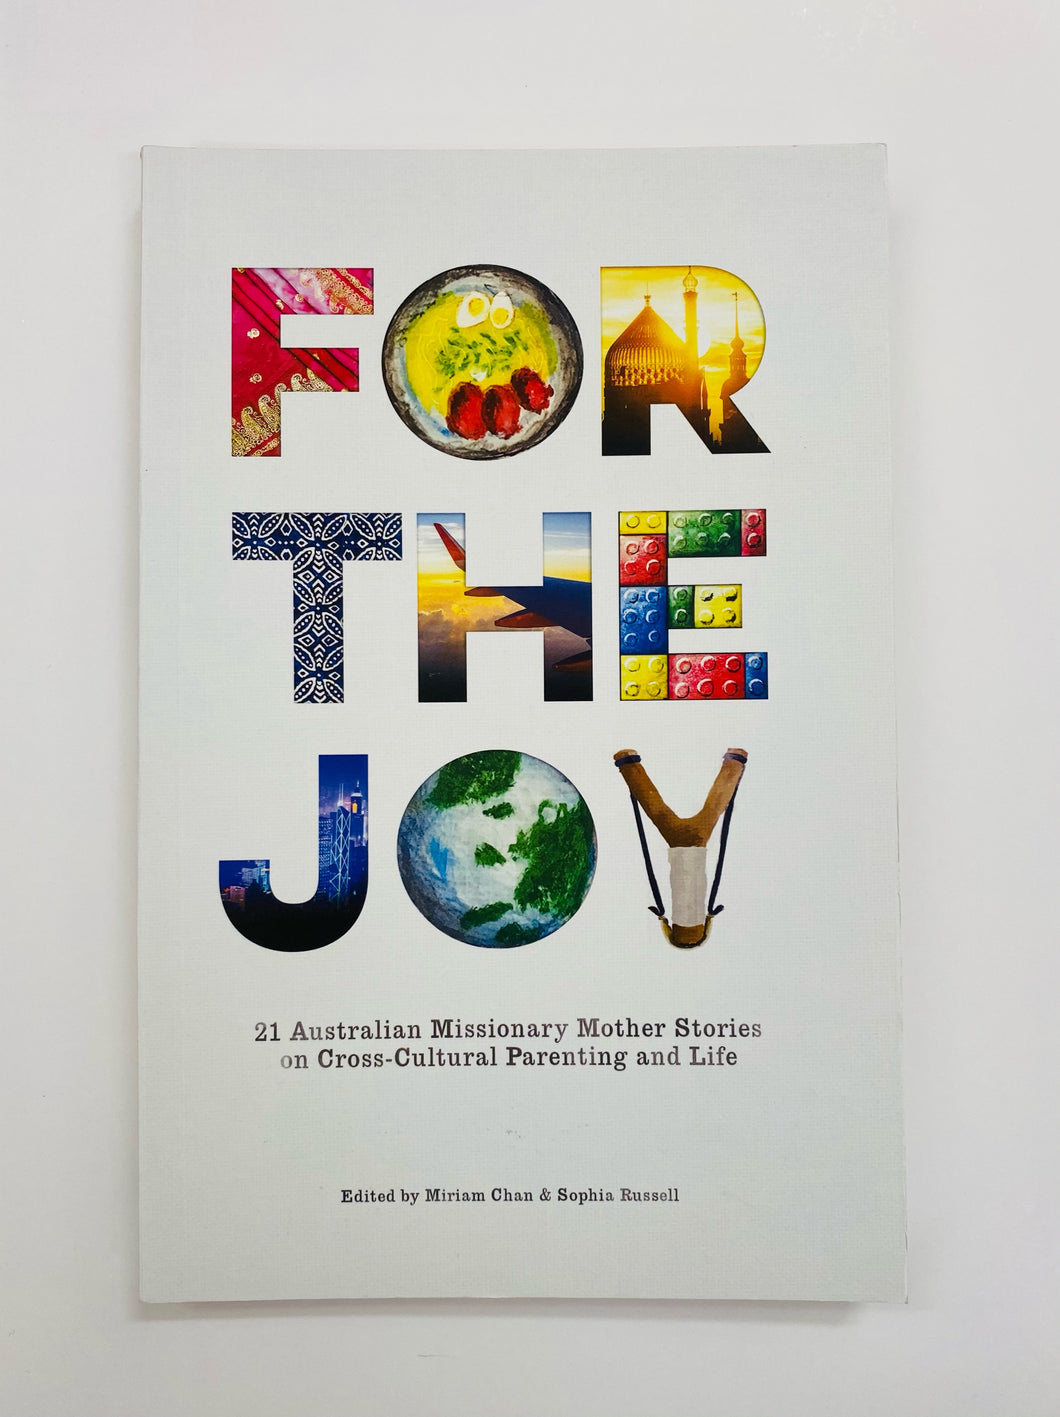 For The Joy: 21 Australian Missionary Mother Stories on Cross-Cultural Parenting and Life